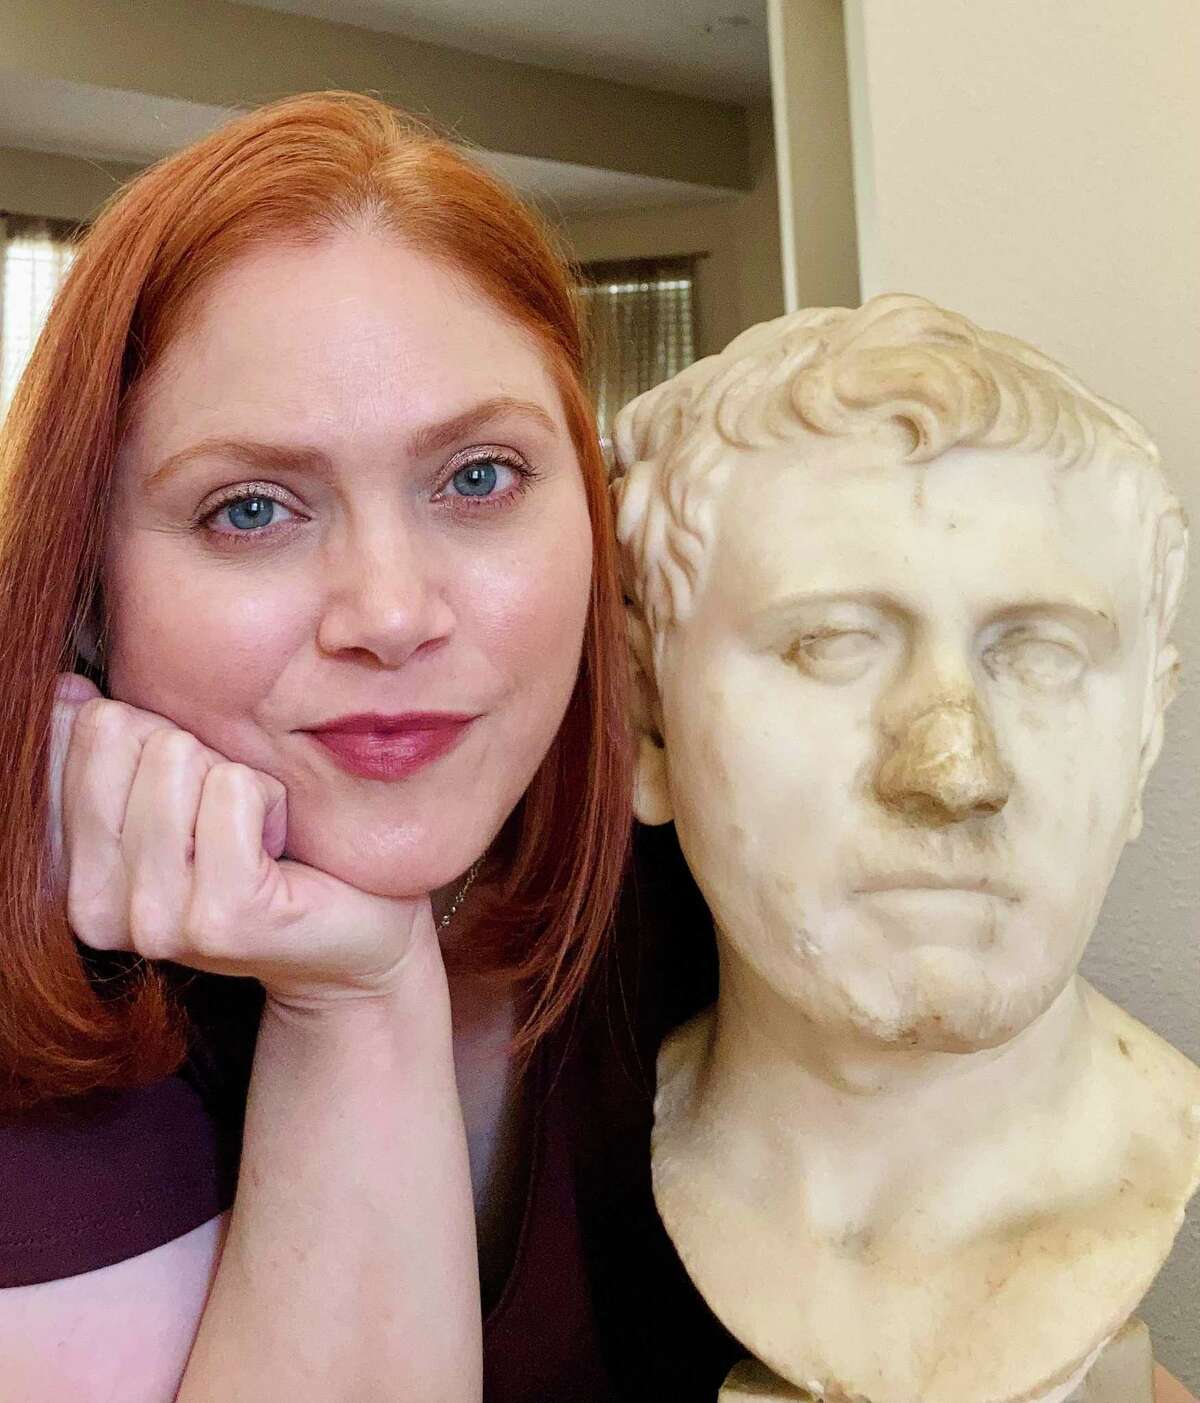 Laura Young bought a bust that turned out to be an ancient sculpture. A reader doesn’t think people should be charged to see this artwork, now at the San Antonio Museum of Art.